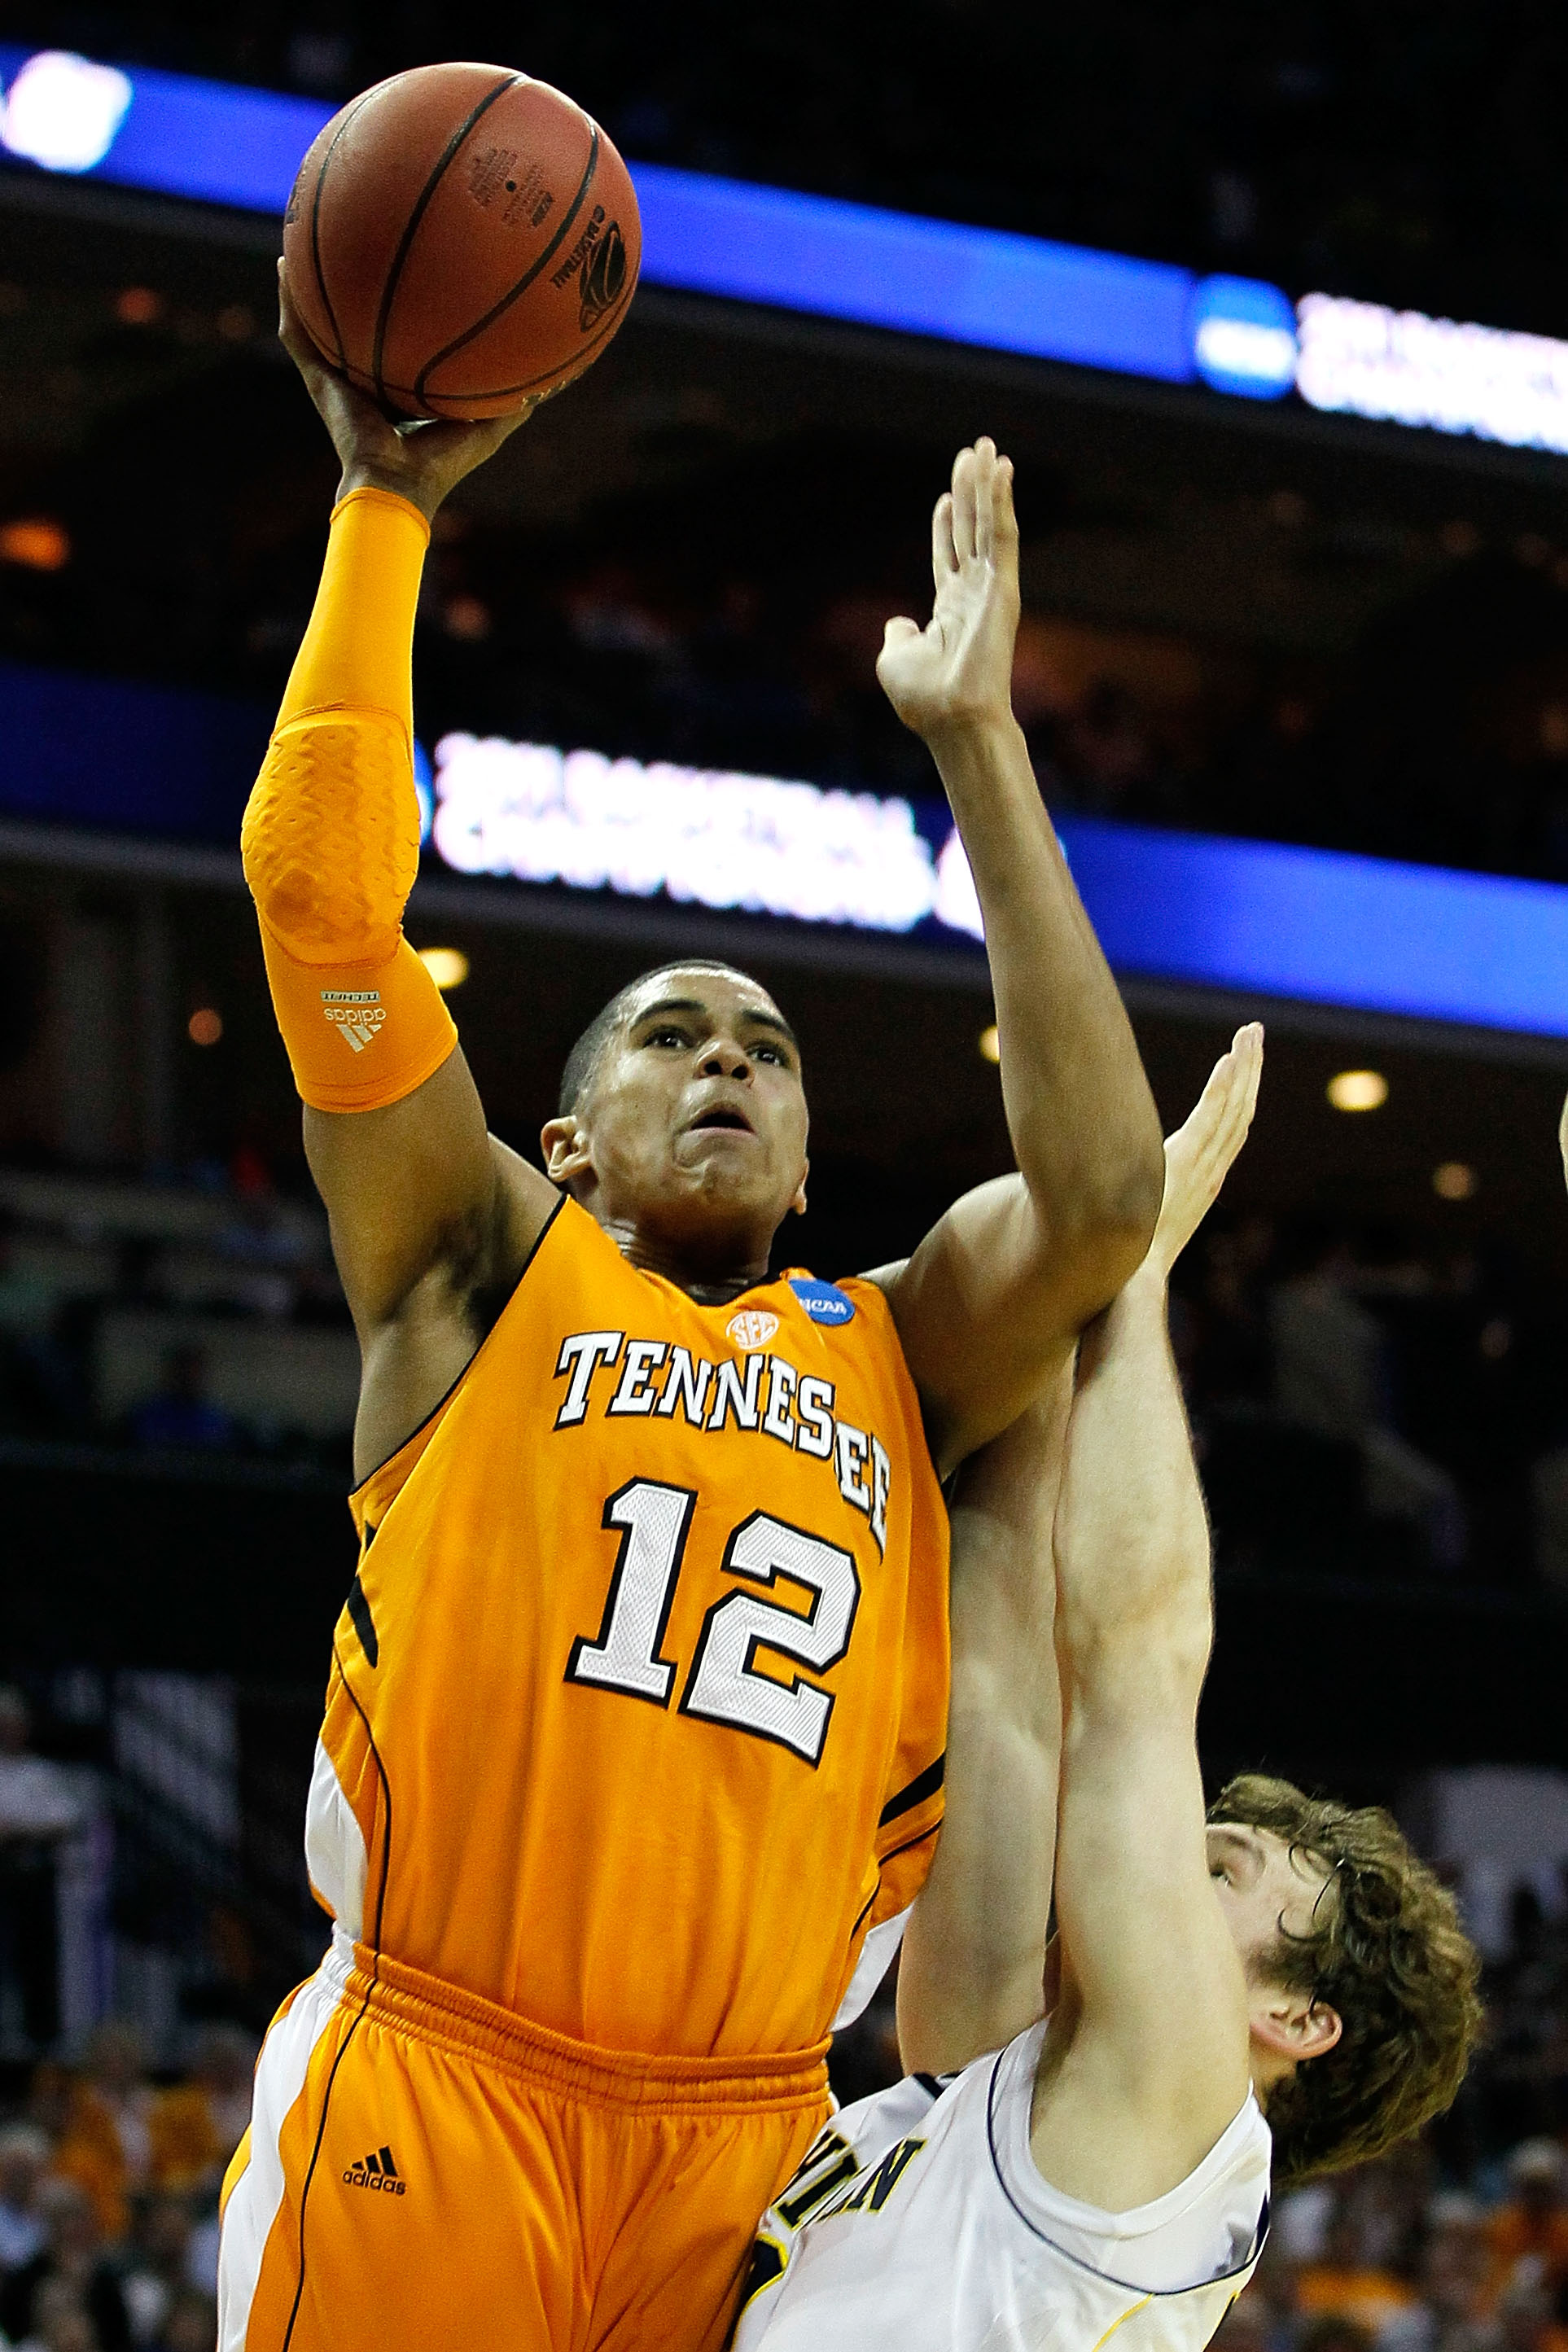 CHARLOTTE, NC - MARCH 18:  Tobias Harris #12 of the Tennessee Volunteers shoots over Zack Novak #0 of the Michigan Wolverines in the first half during the second round of the 2011 NCAA men's basketball tournament at Time Warner Cable Arena on March 18, 20